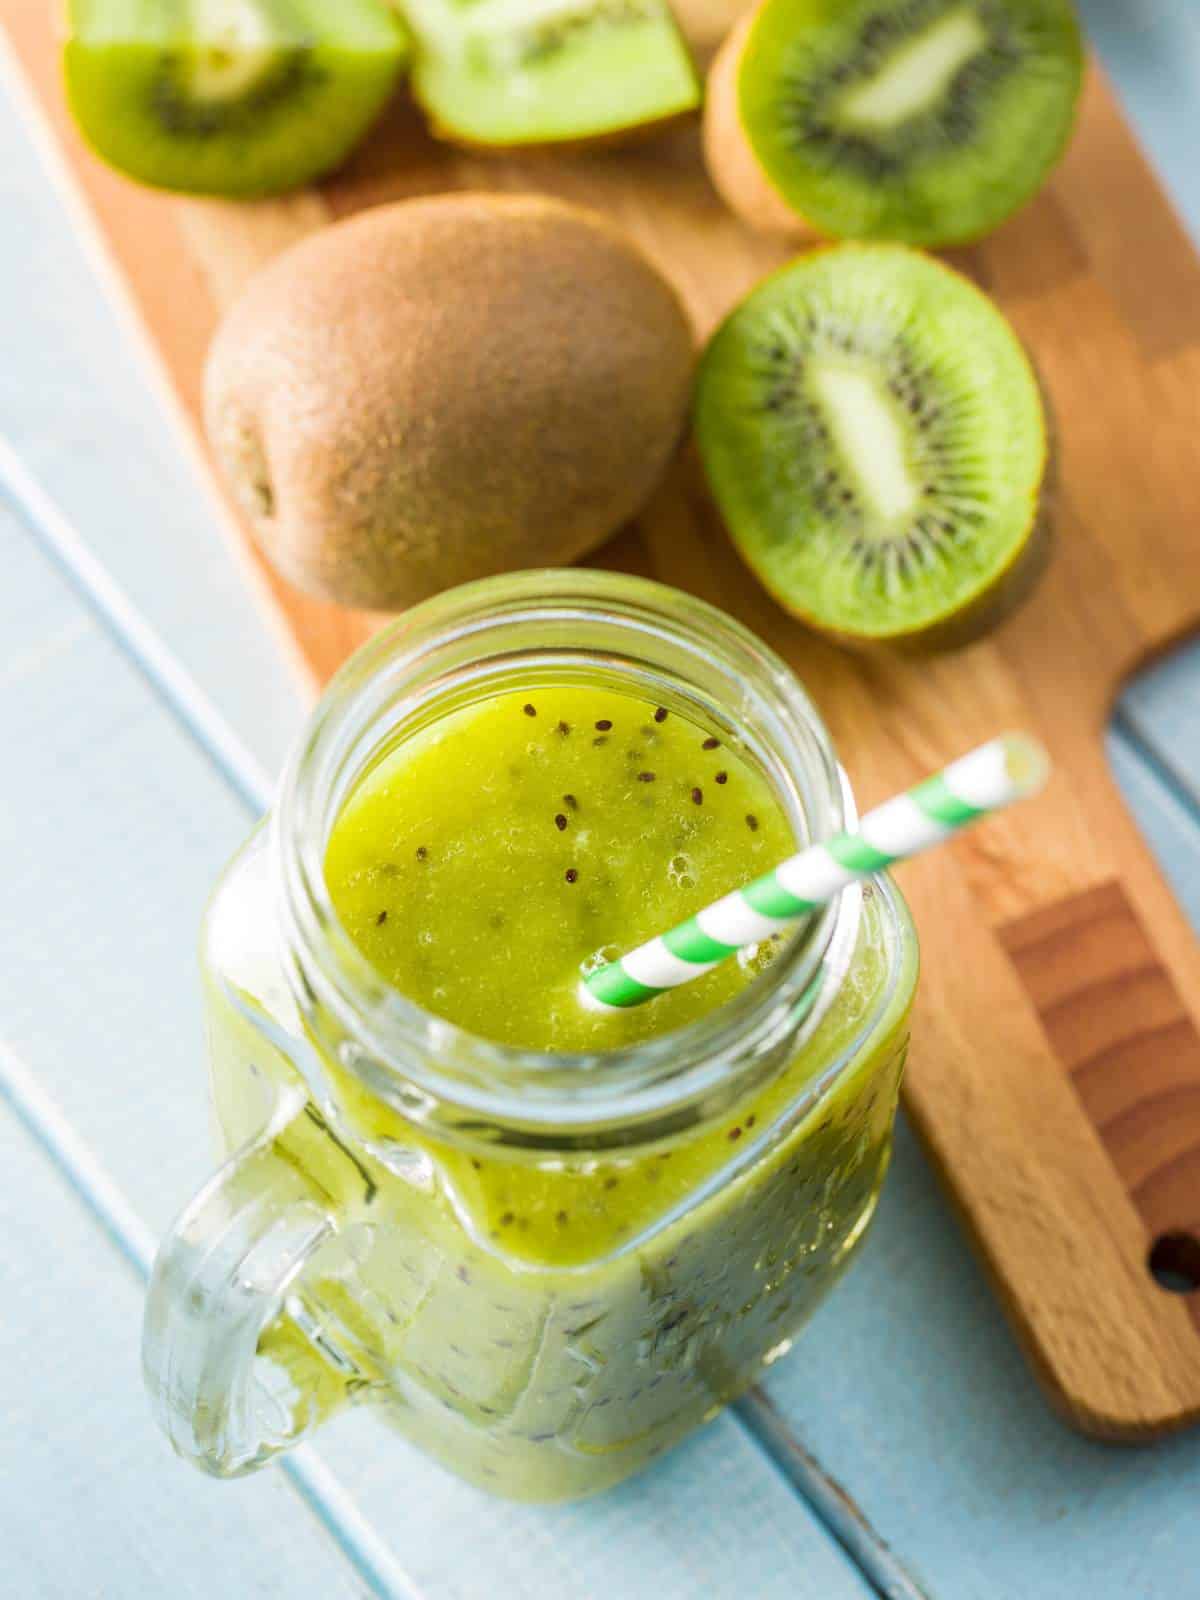 Mason jar filled with kiwi juice, served with a straw, next to several ripe kiwis.